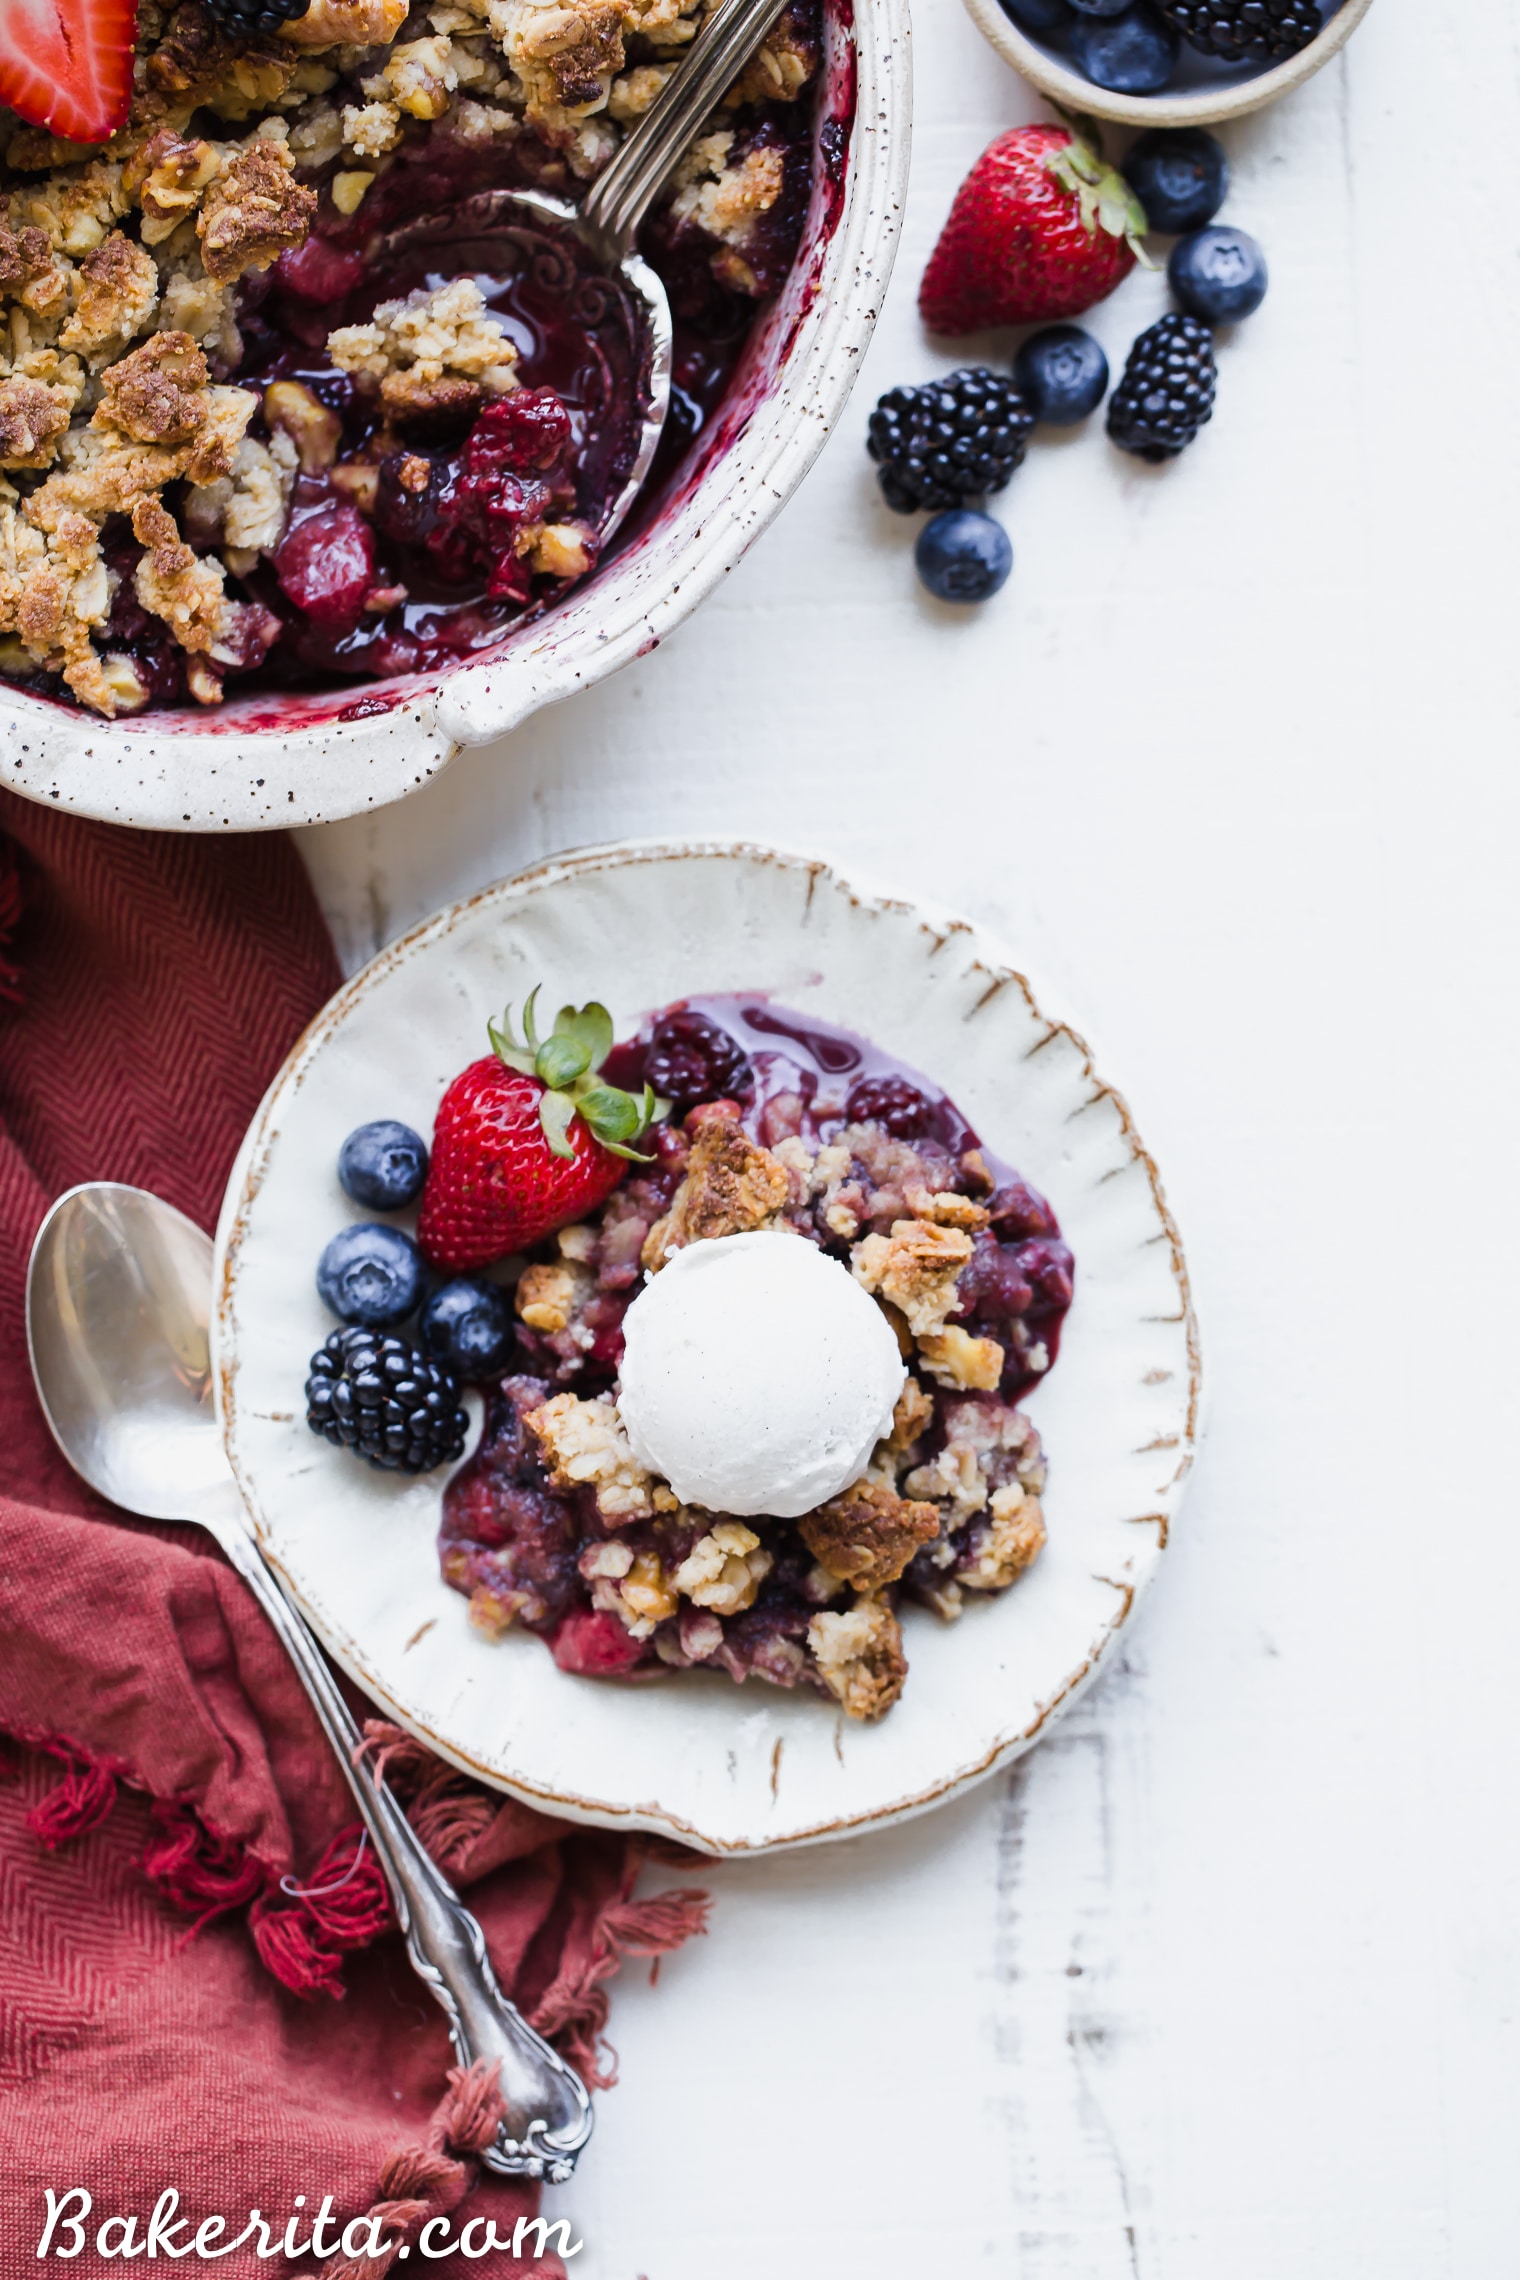 This Mixed Berry Crisp uses a mix of your favorite berries and is topped with a crunchy oatmeal crisp topping. This flavorful dessert is gluten-free, vegan, and best served with some dairy-free ice cream or coconut whipped cream!